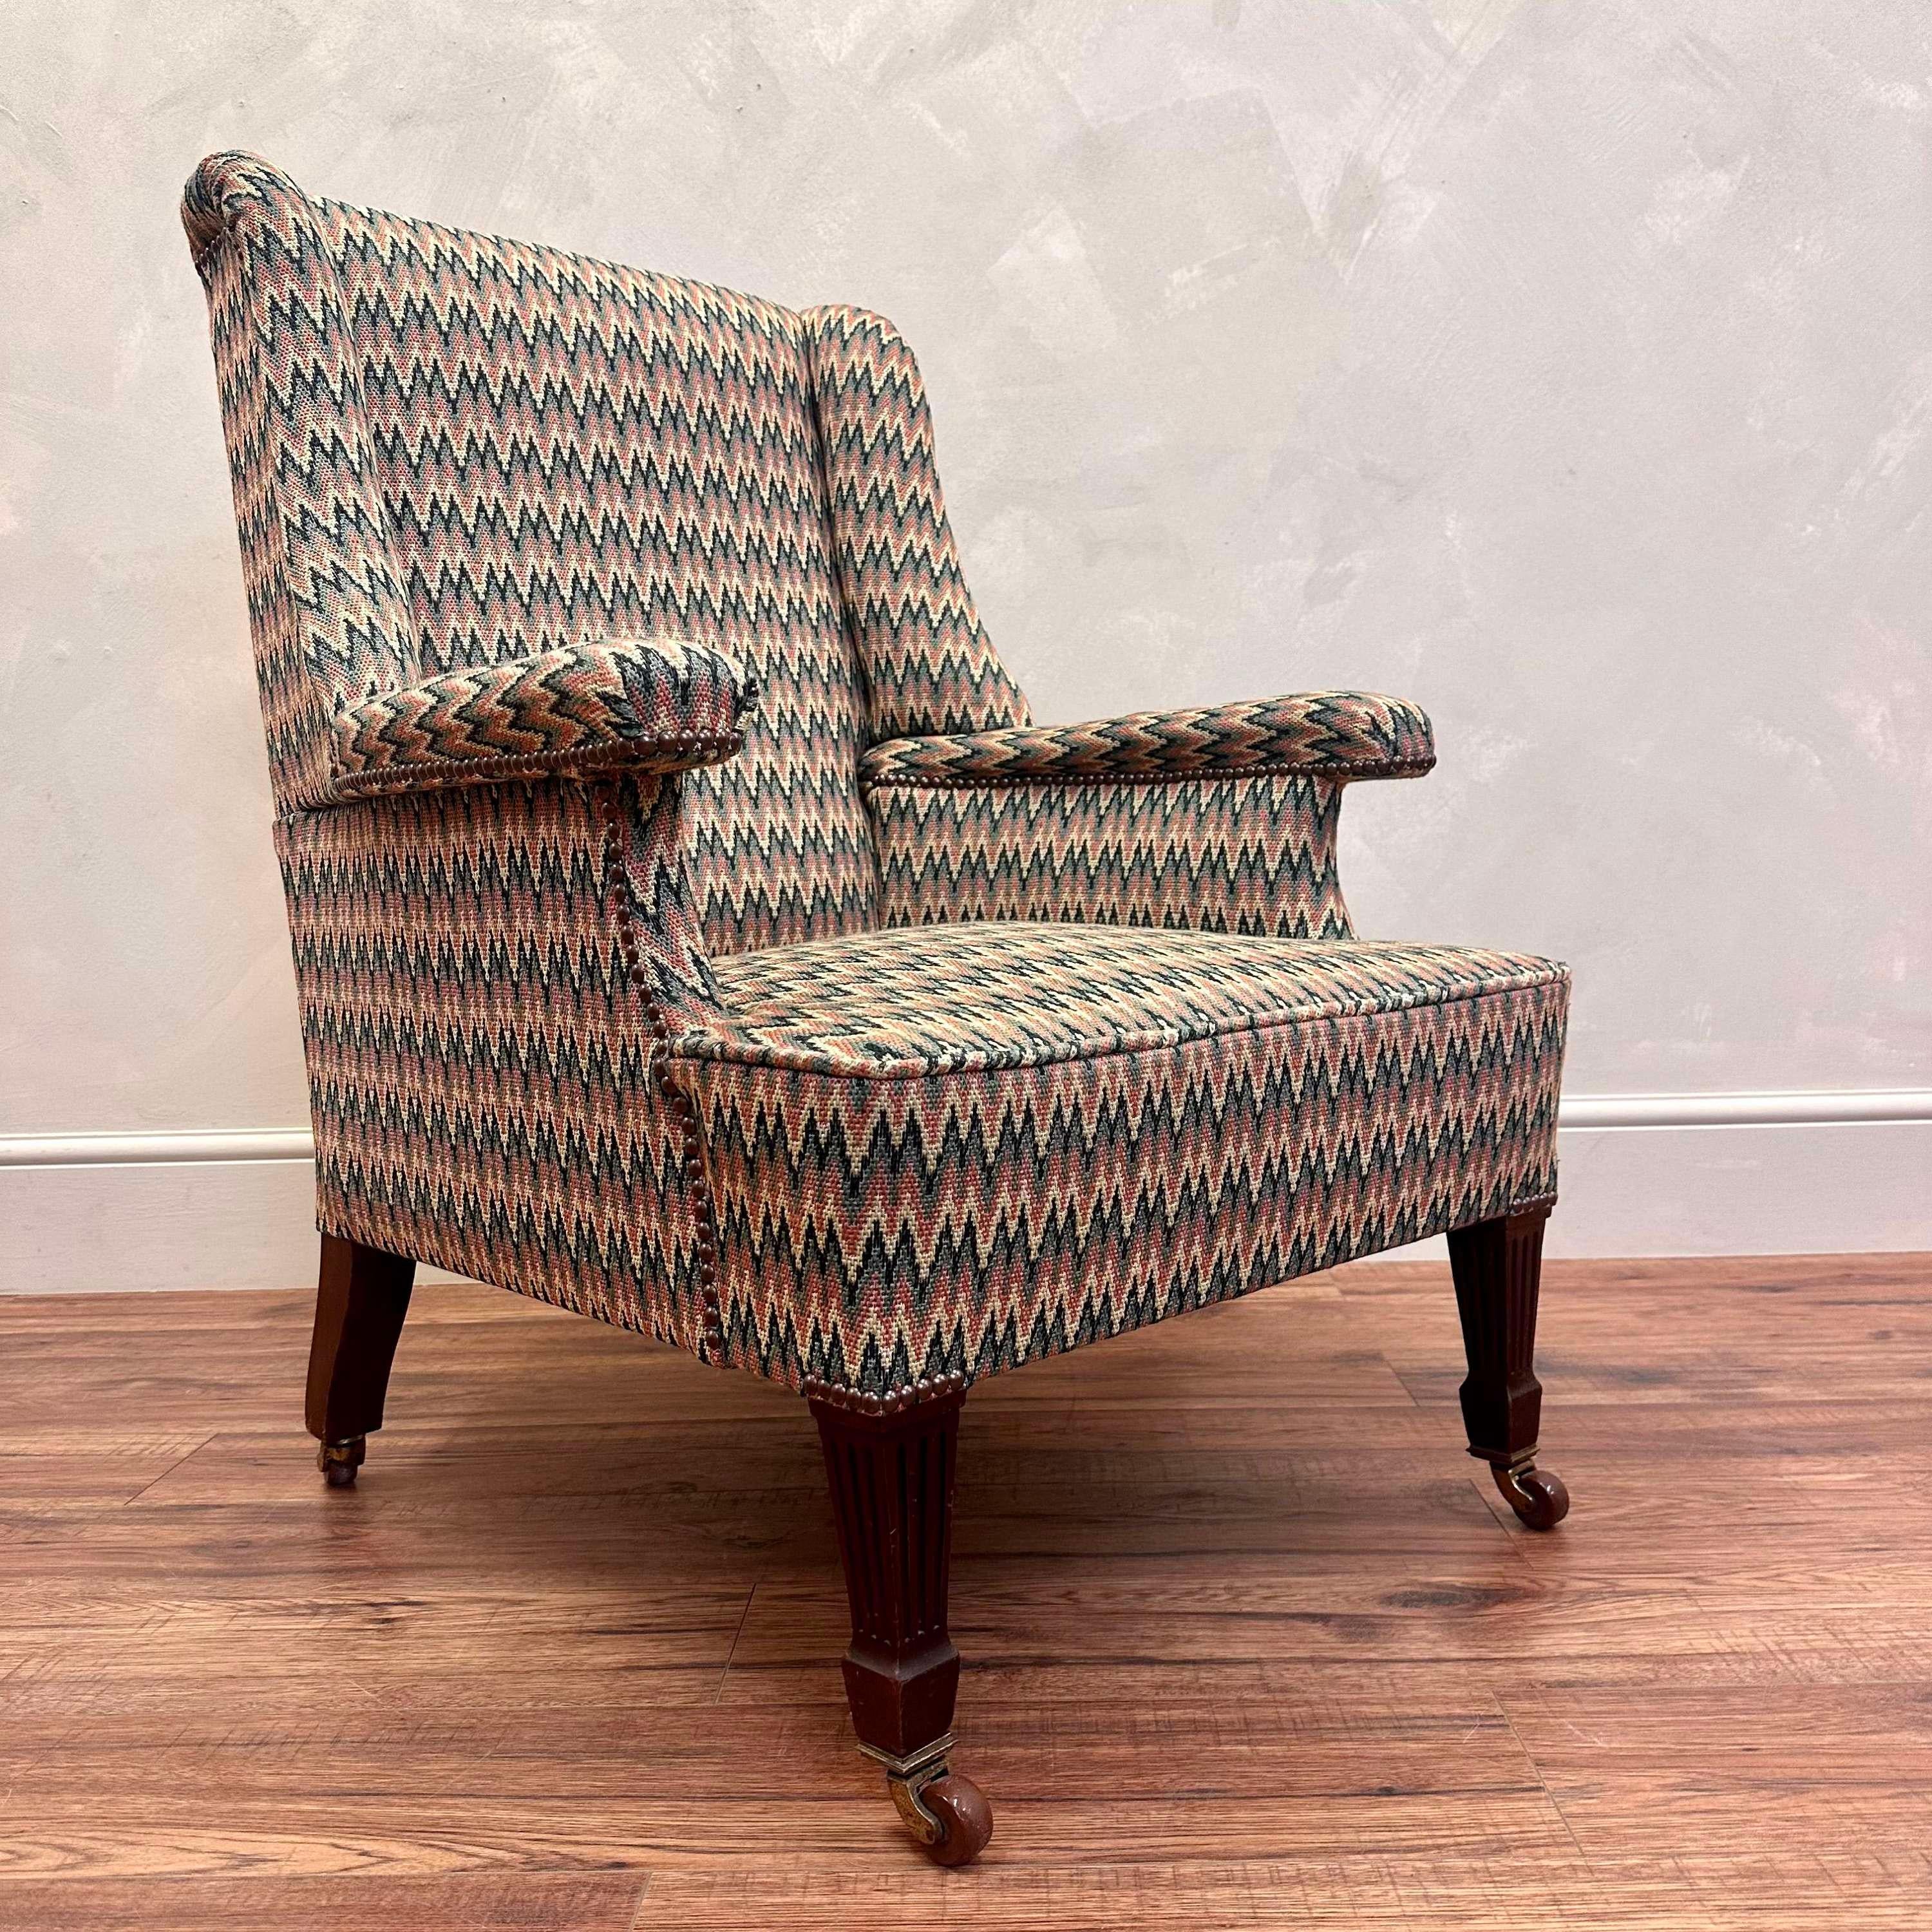 Great shape, Victorian armchair with slim arm rests.
Upholstered with hard wearing, flame stitch tapestry fabric.
H 95cm SH 38cm W 71cm D 70cm
Please message if any further info or photos are required 

We are happy to work with you with your choice